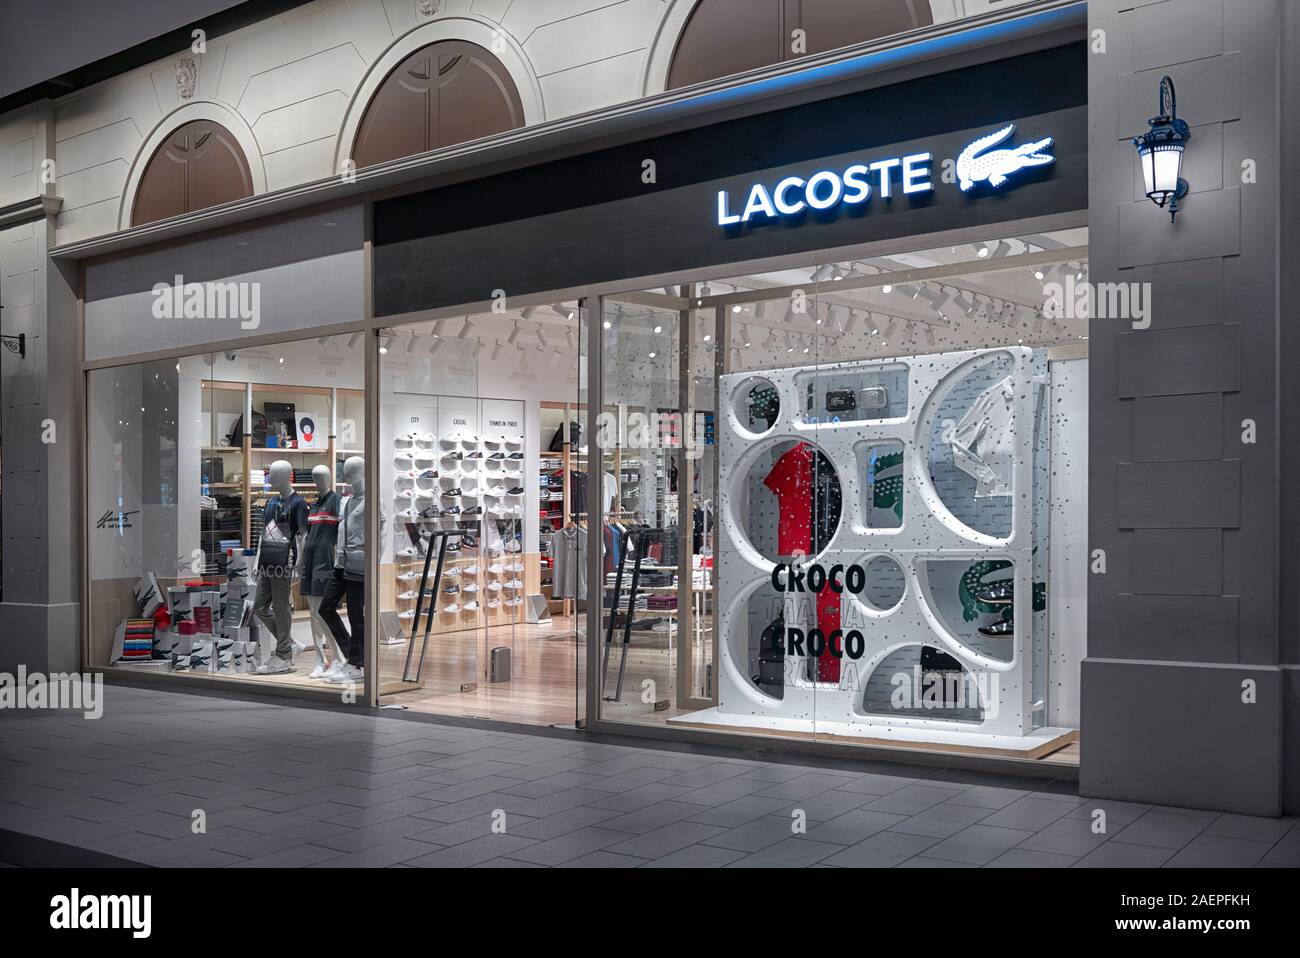 lacoste pavilion, enormous deal Save 84% available - www.apmf.mg